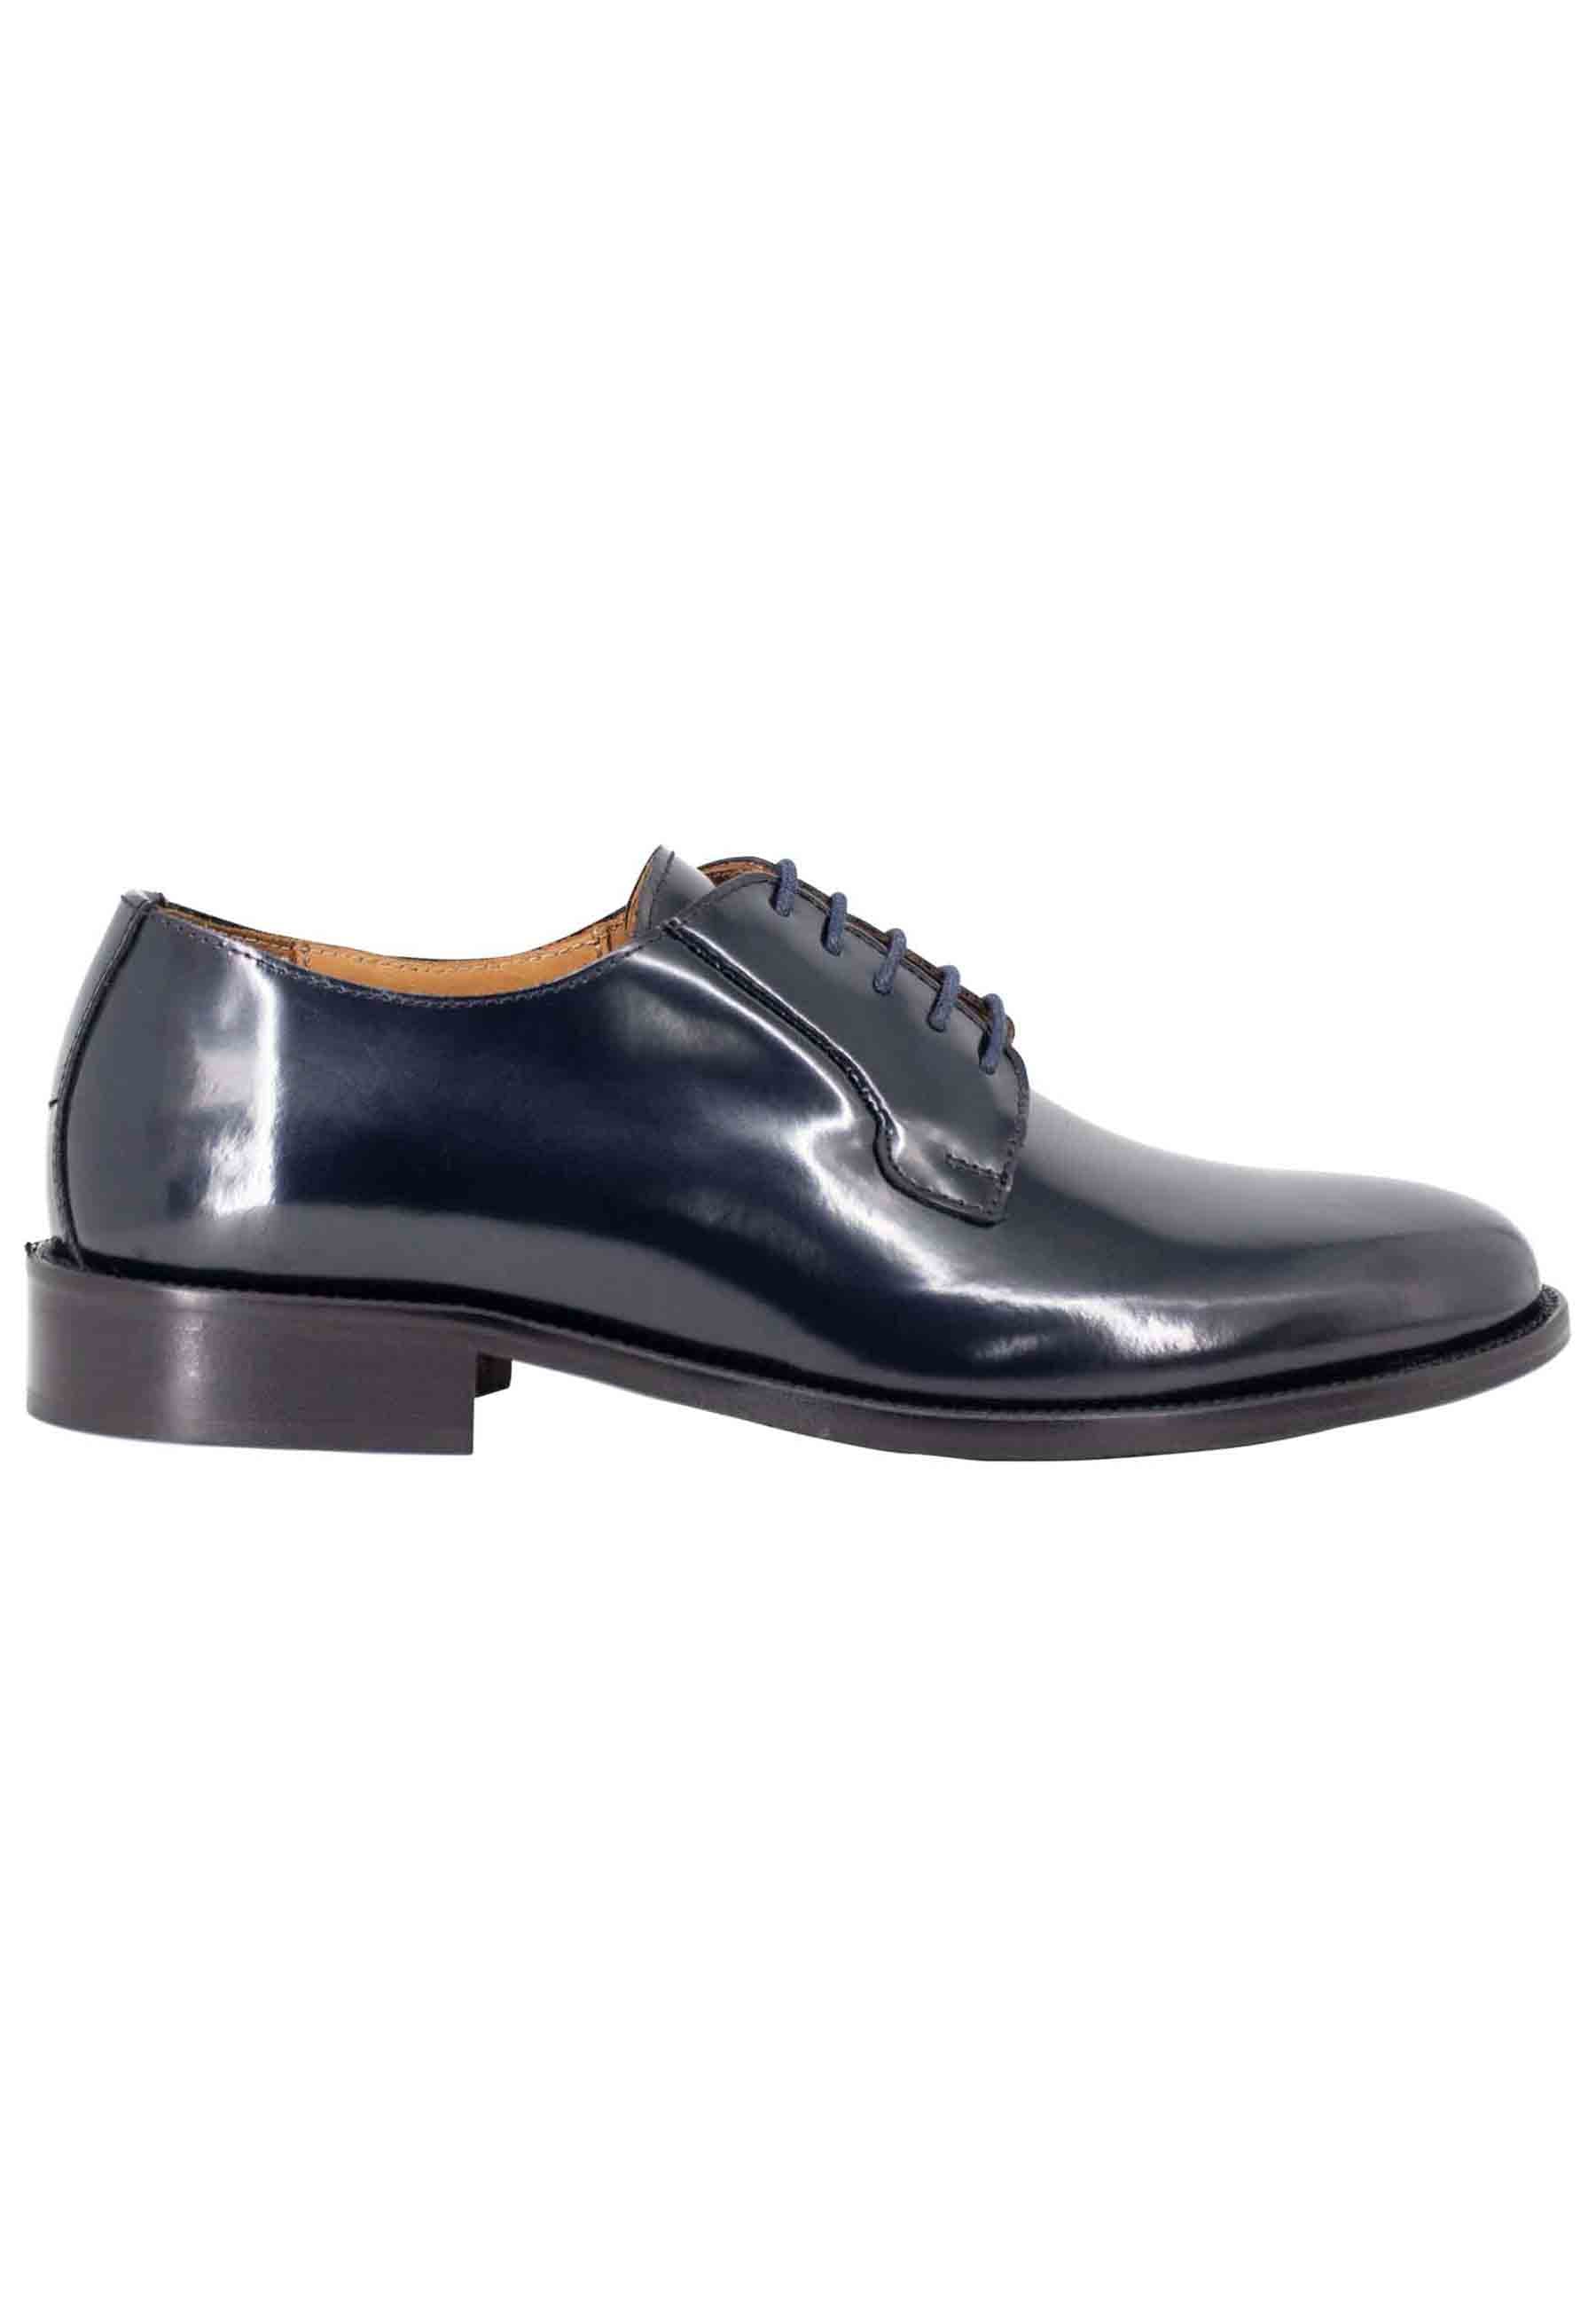 Men's lace-ups in blue shiny leather with stitched leather sole